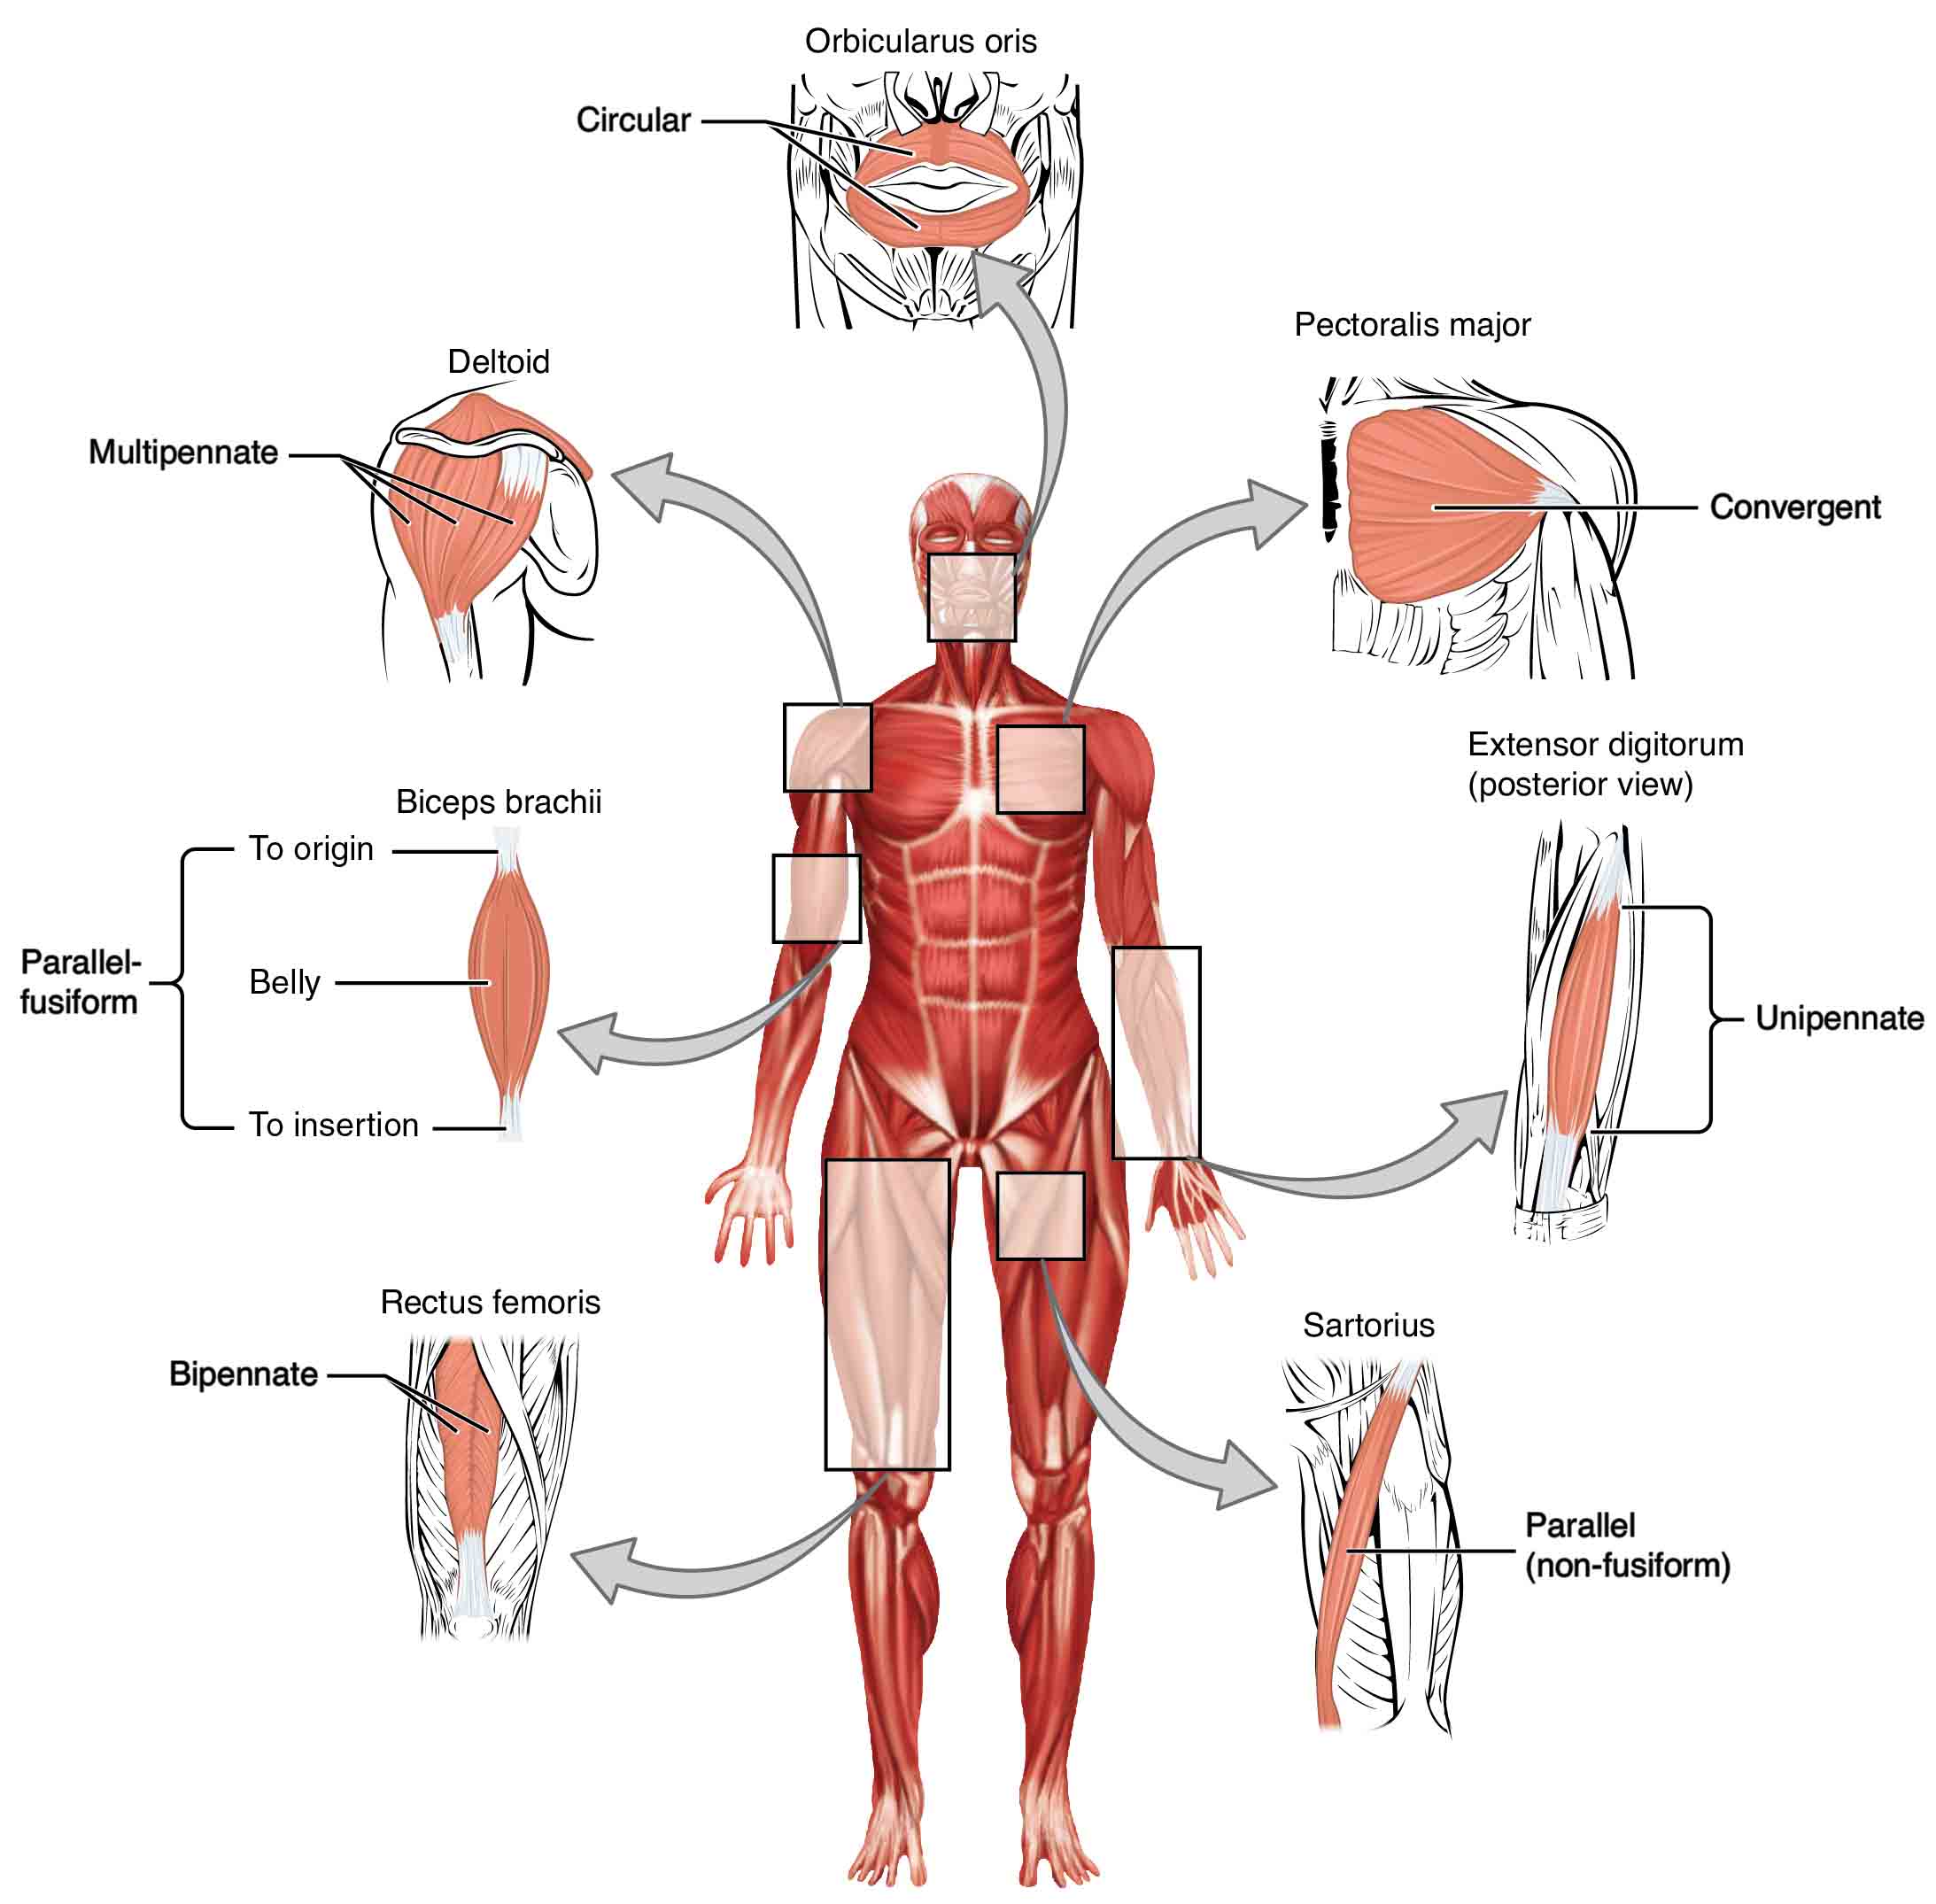 This figure shows the human body with the major muscle groups labeled.